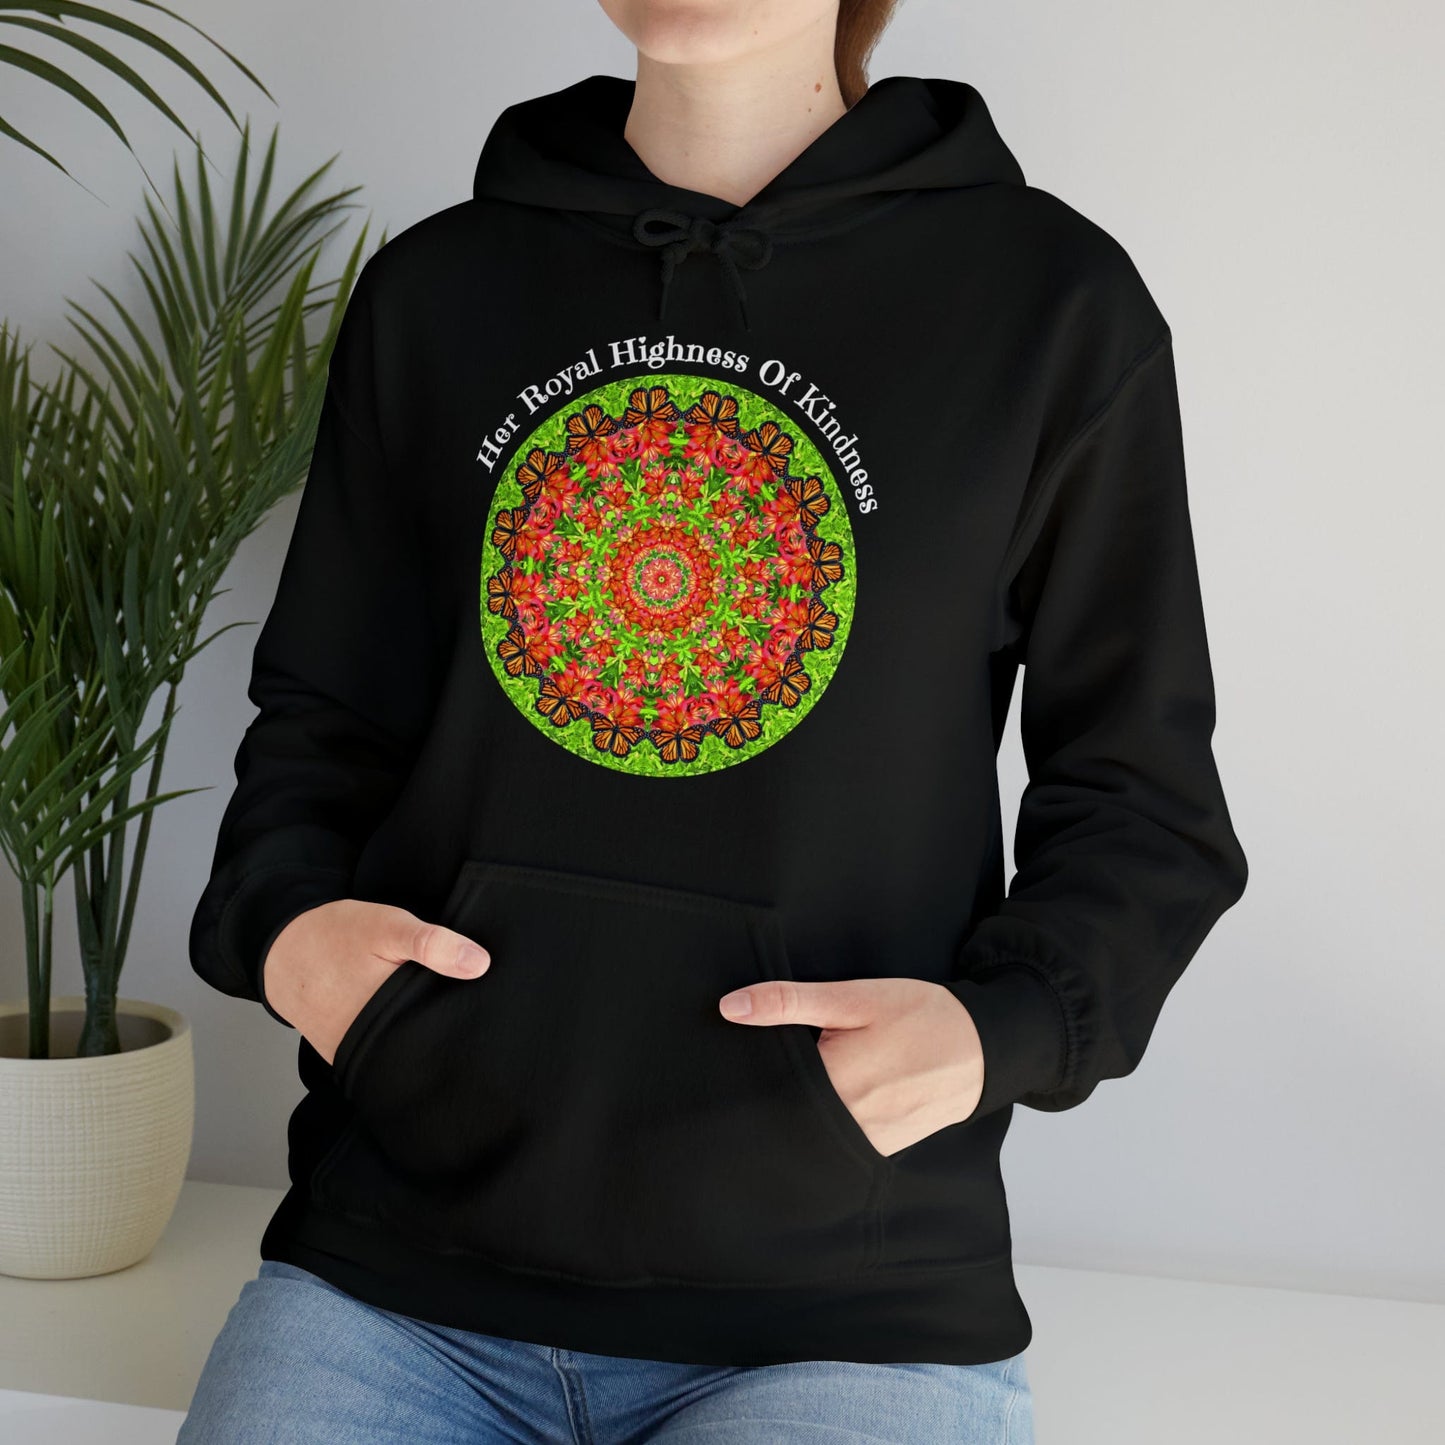 Pretty & Cute Butterfly Kindness Graphic Hoodie Sweatshirt Monarch Butterfly Mandala Art Her Royal Highness Of Kindness black